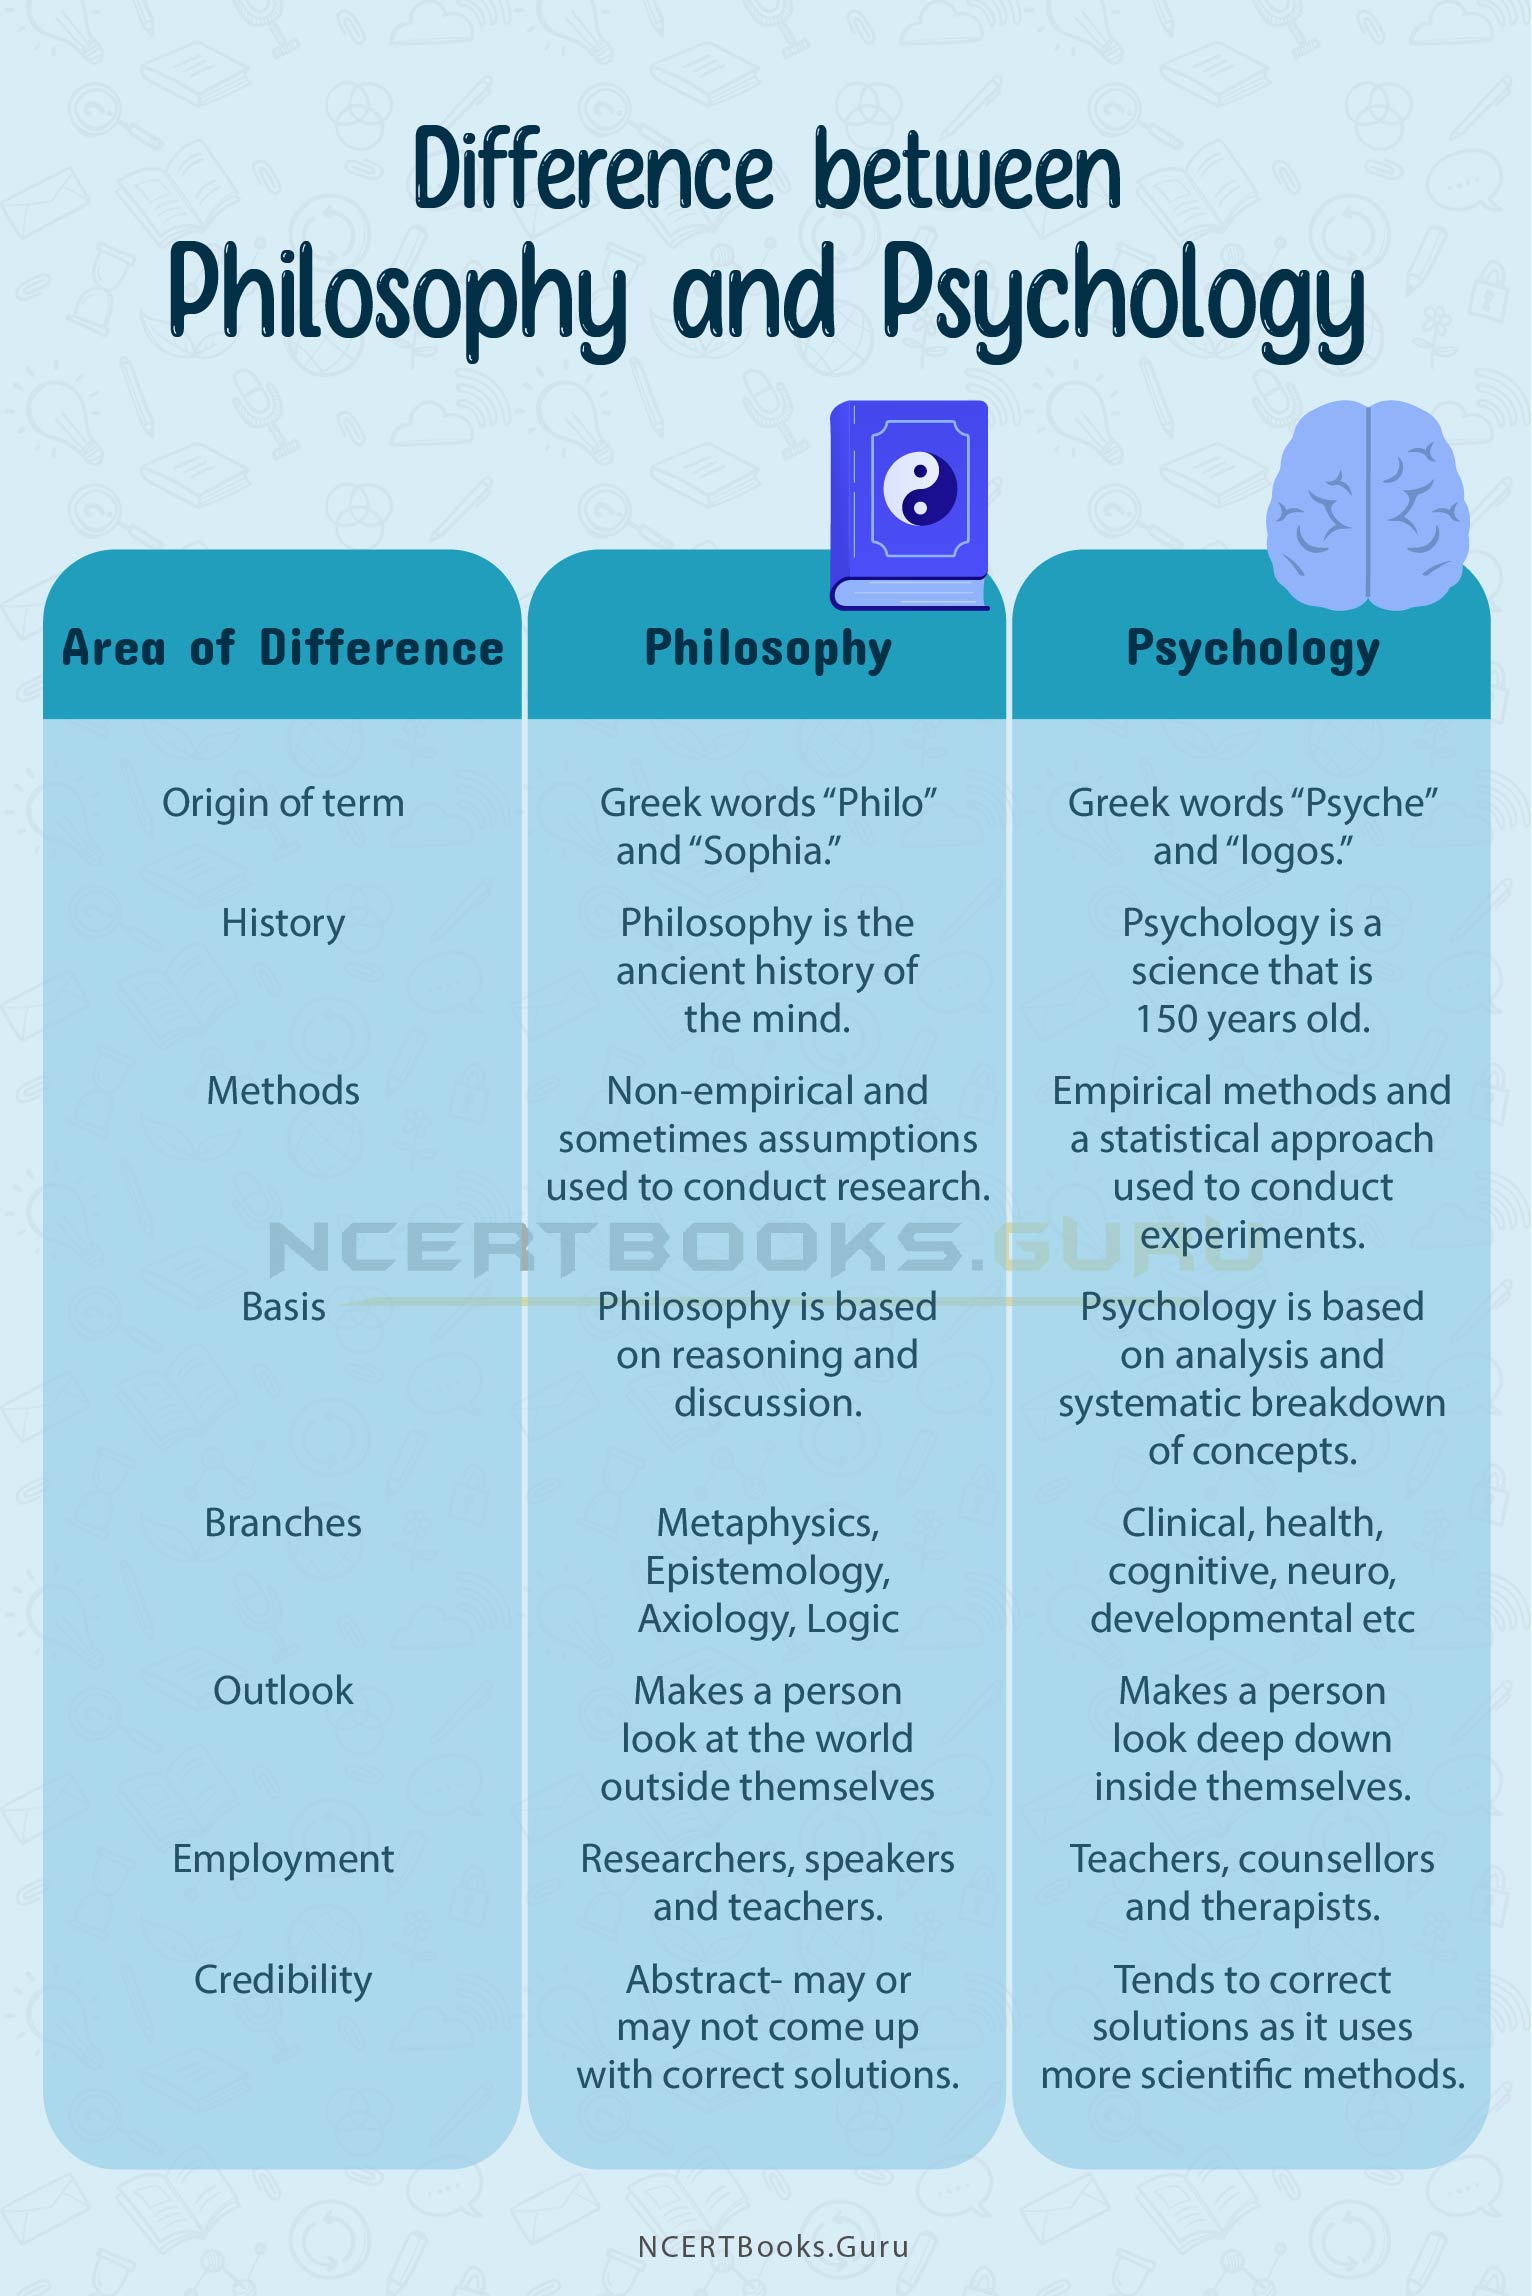 Difference Between Philosophy and Psychology 2